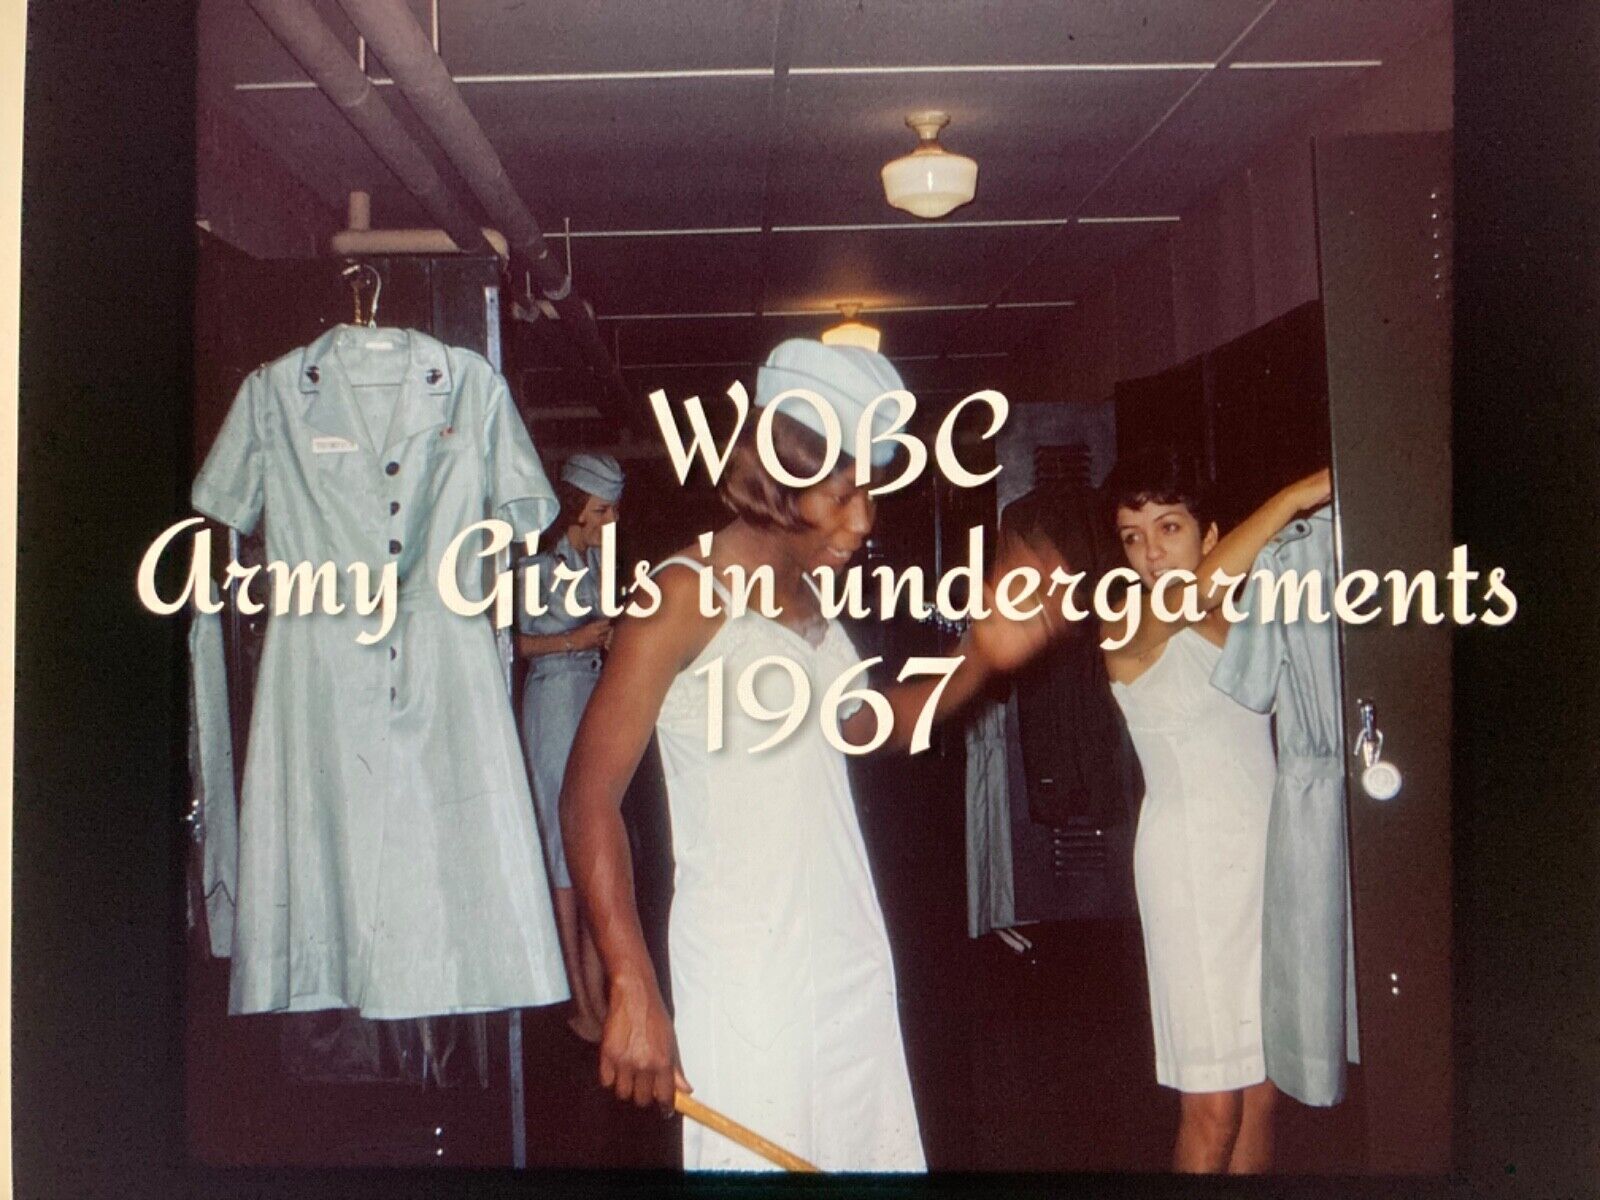 Size 126 Slide WOBC Army Girls in undergarments - 1967